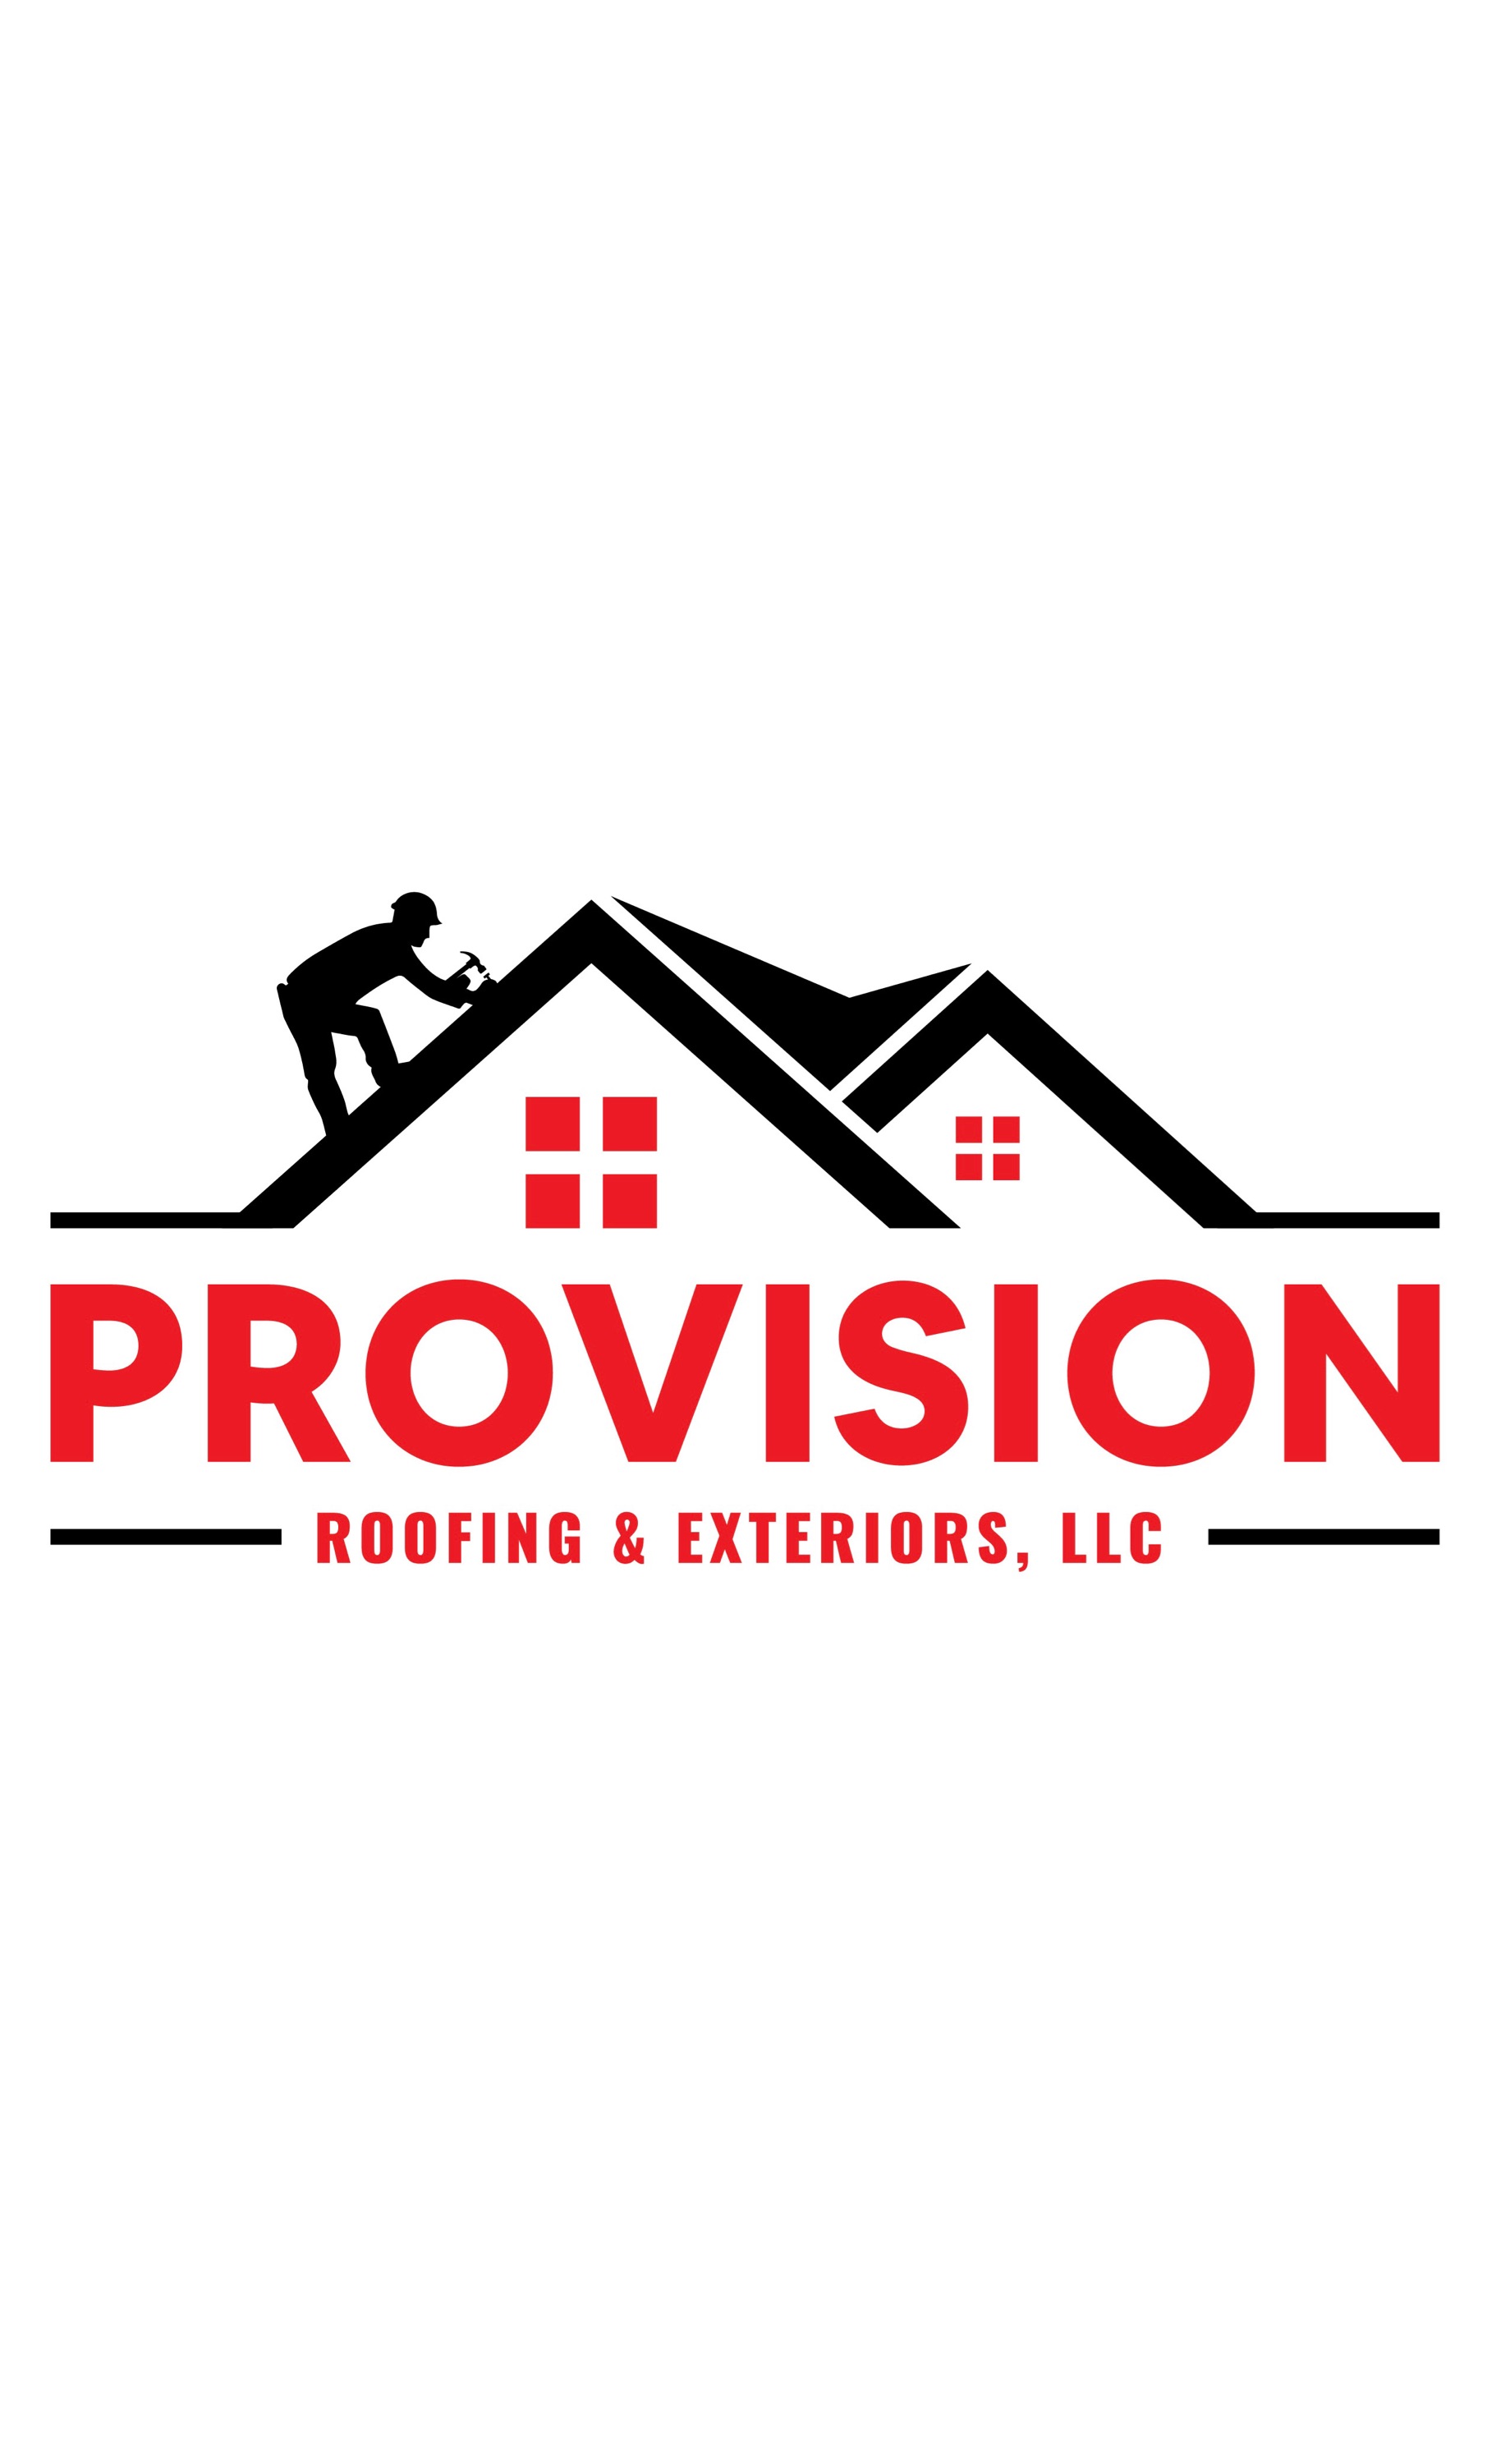 ProVision Roofing & Exteriors Logo